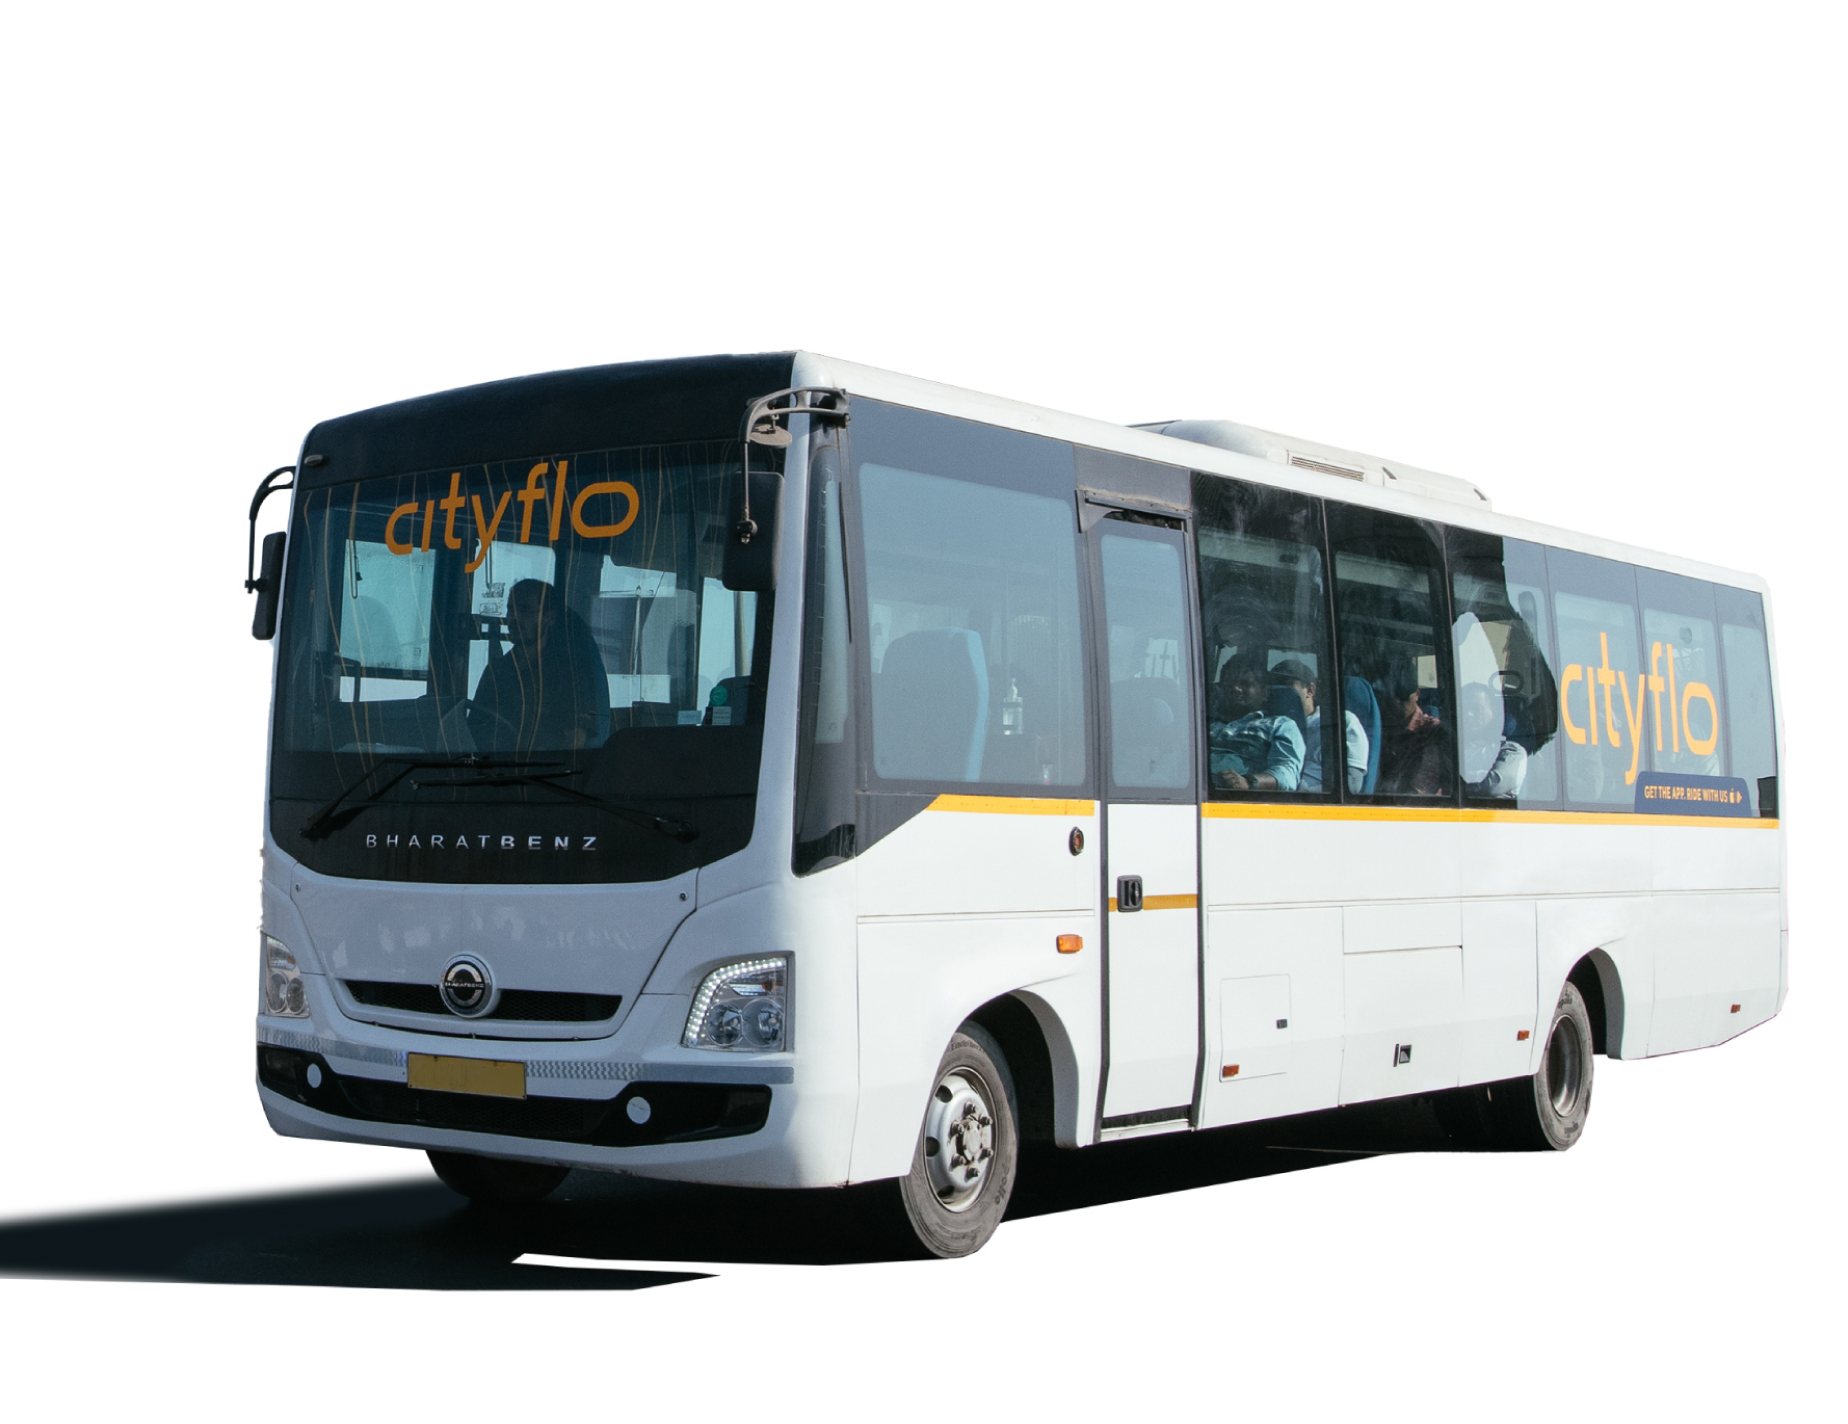 A 35 seater AC Bharat Benz bus for rent on display.